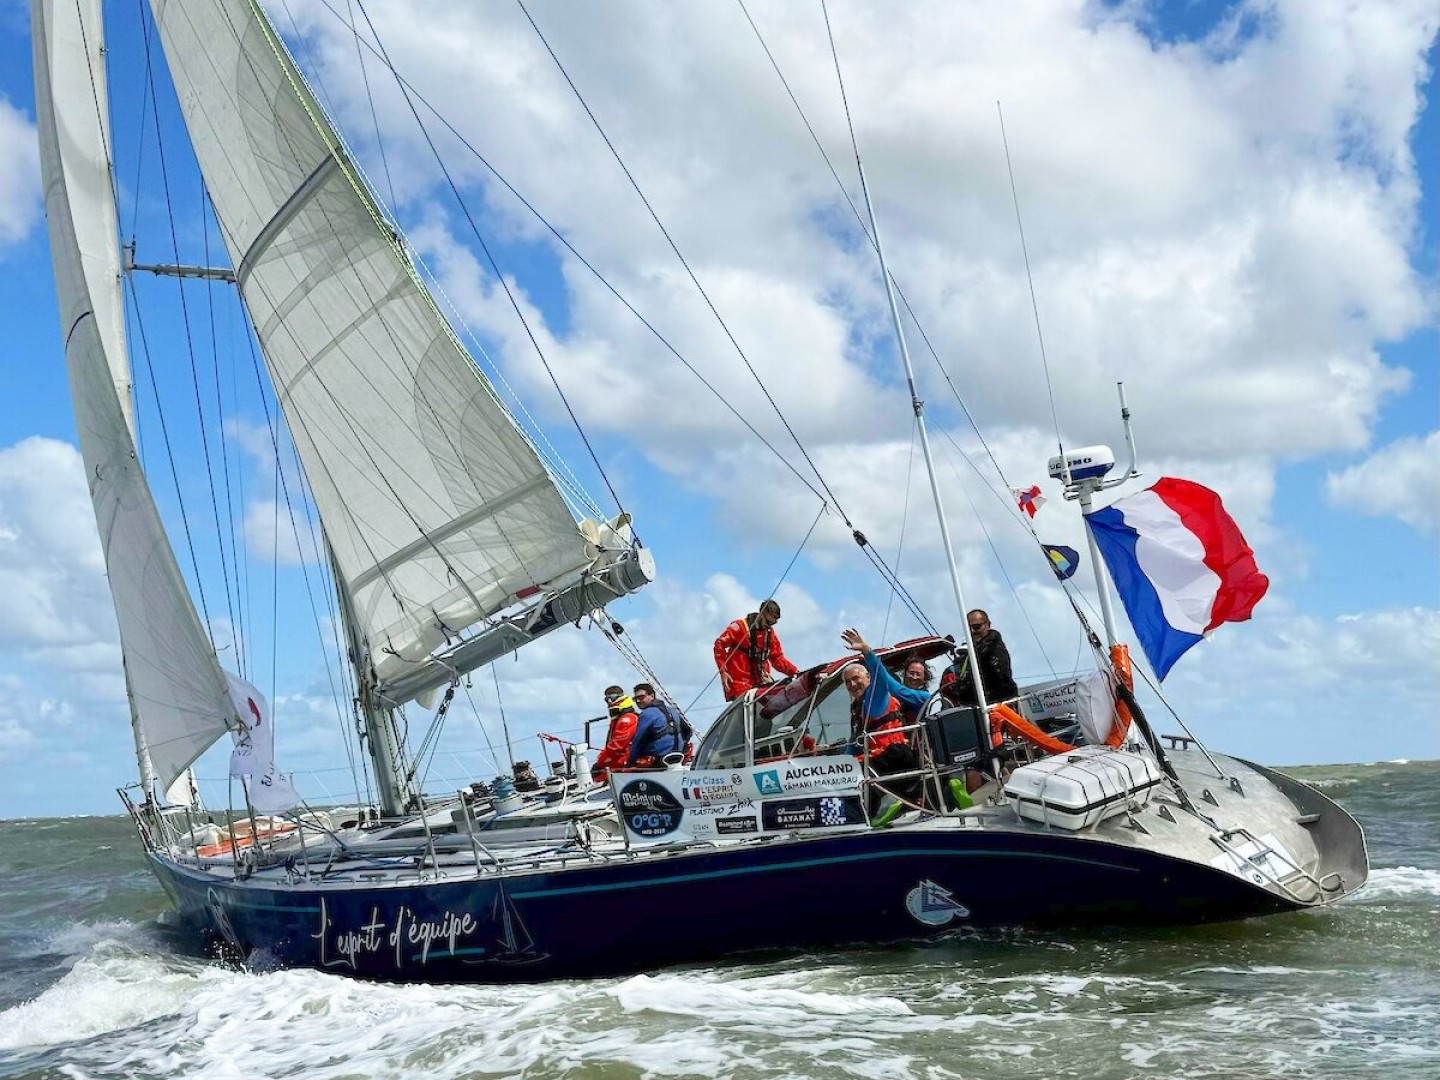 Ex-Whitbread Winner ( now for sale) - L'Esprit d'équipe determined to show what they are capable of leaving Punta del Este on March 5th. Credit: Aïda Valceanu/ OGR2023